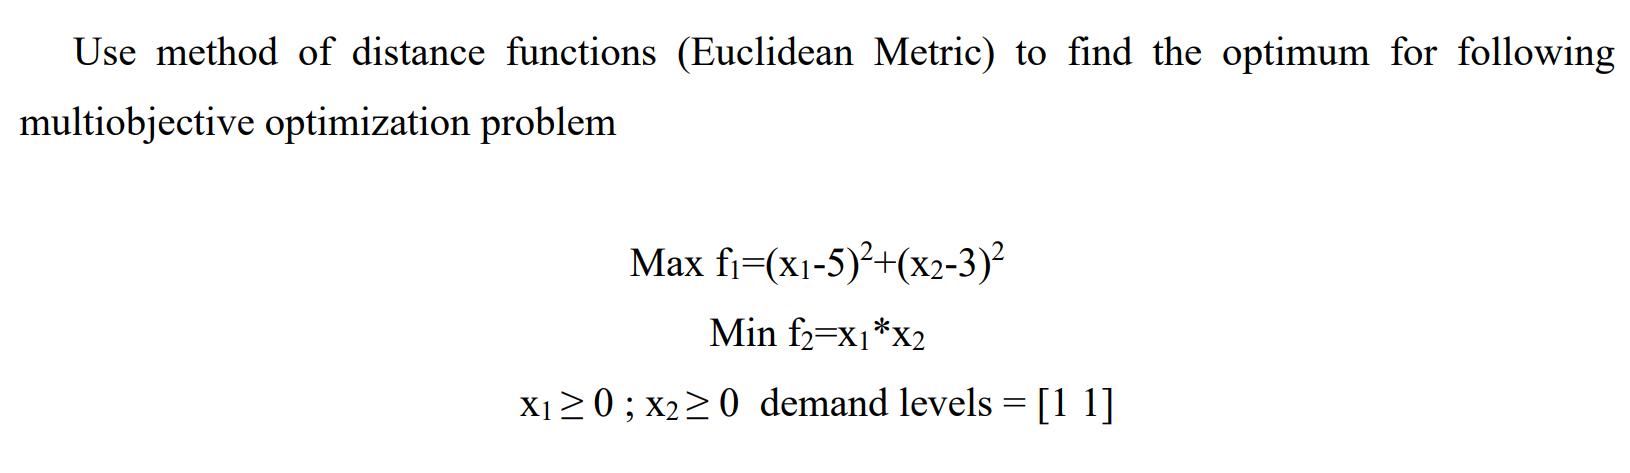 Use method of distance functions (Euclidean Metric) to find the optimum for following multiobjective